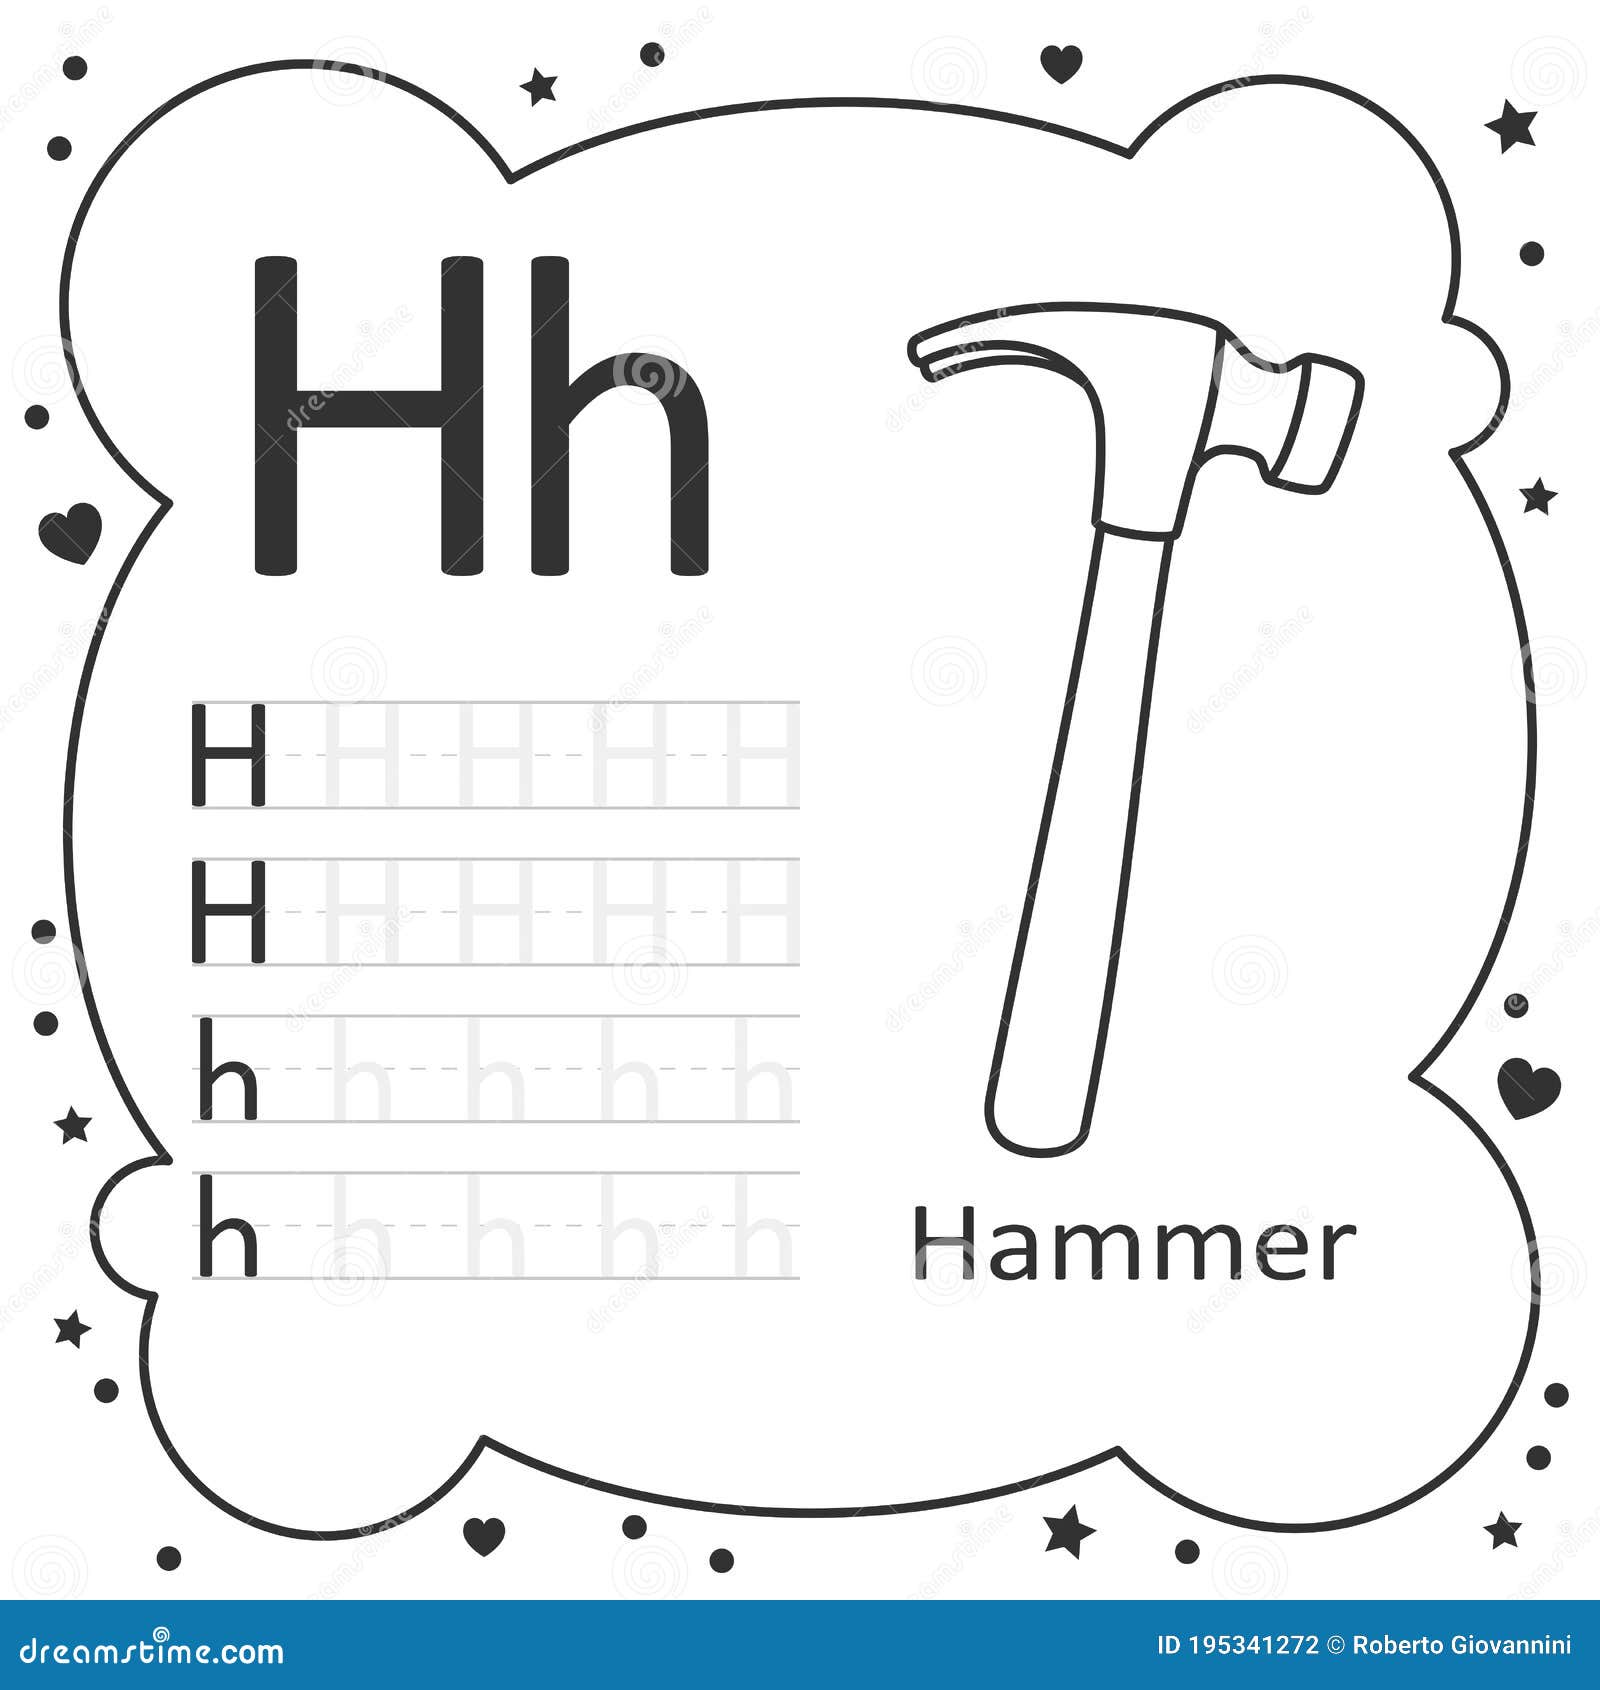 Coloring alphabet tracing letters hammer stock vector